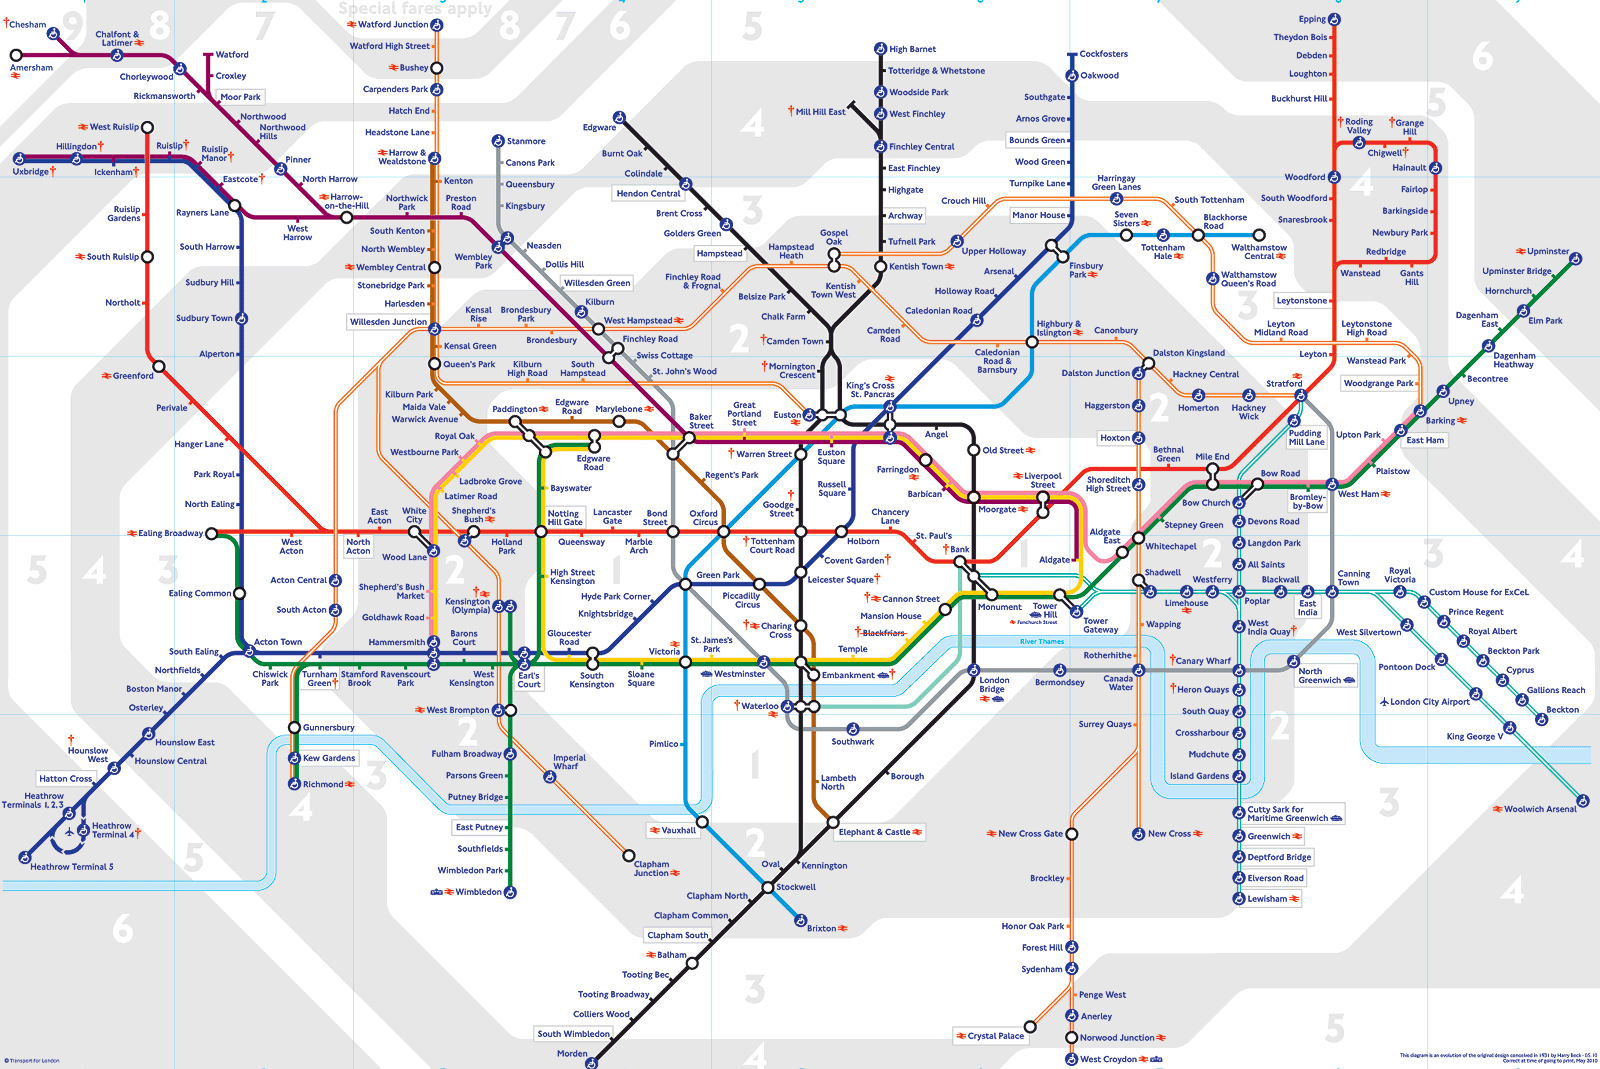 resources/images/tube_map.gif